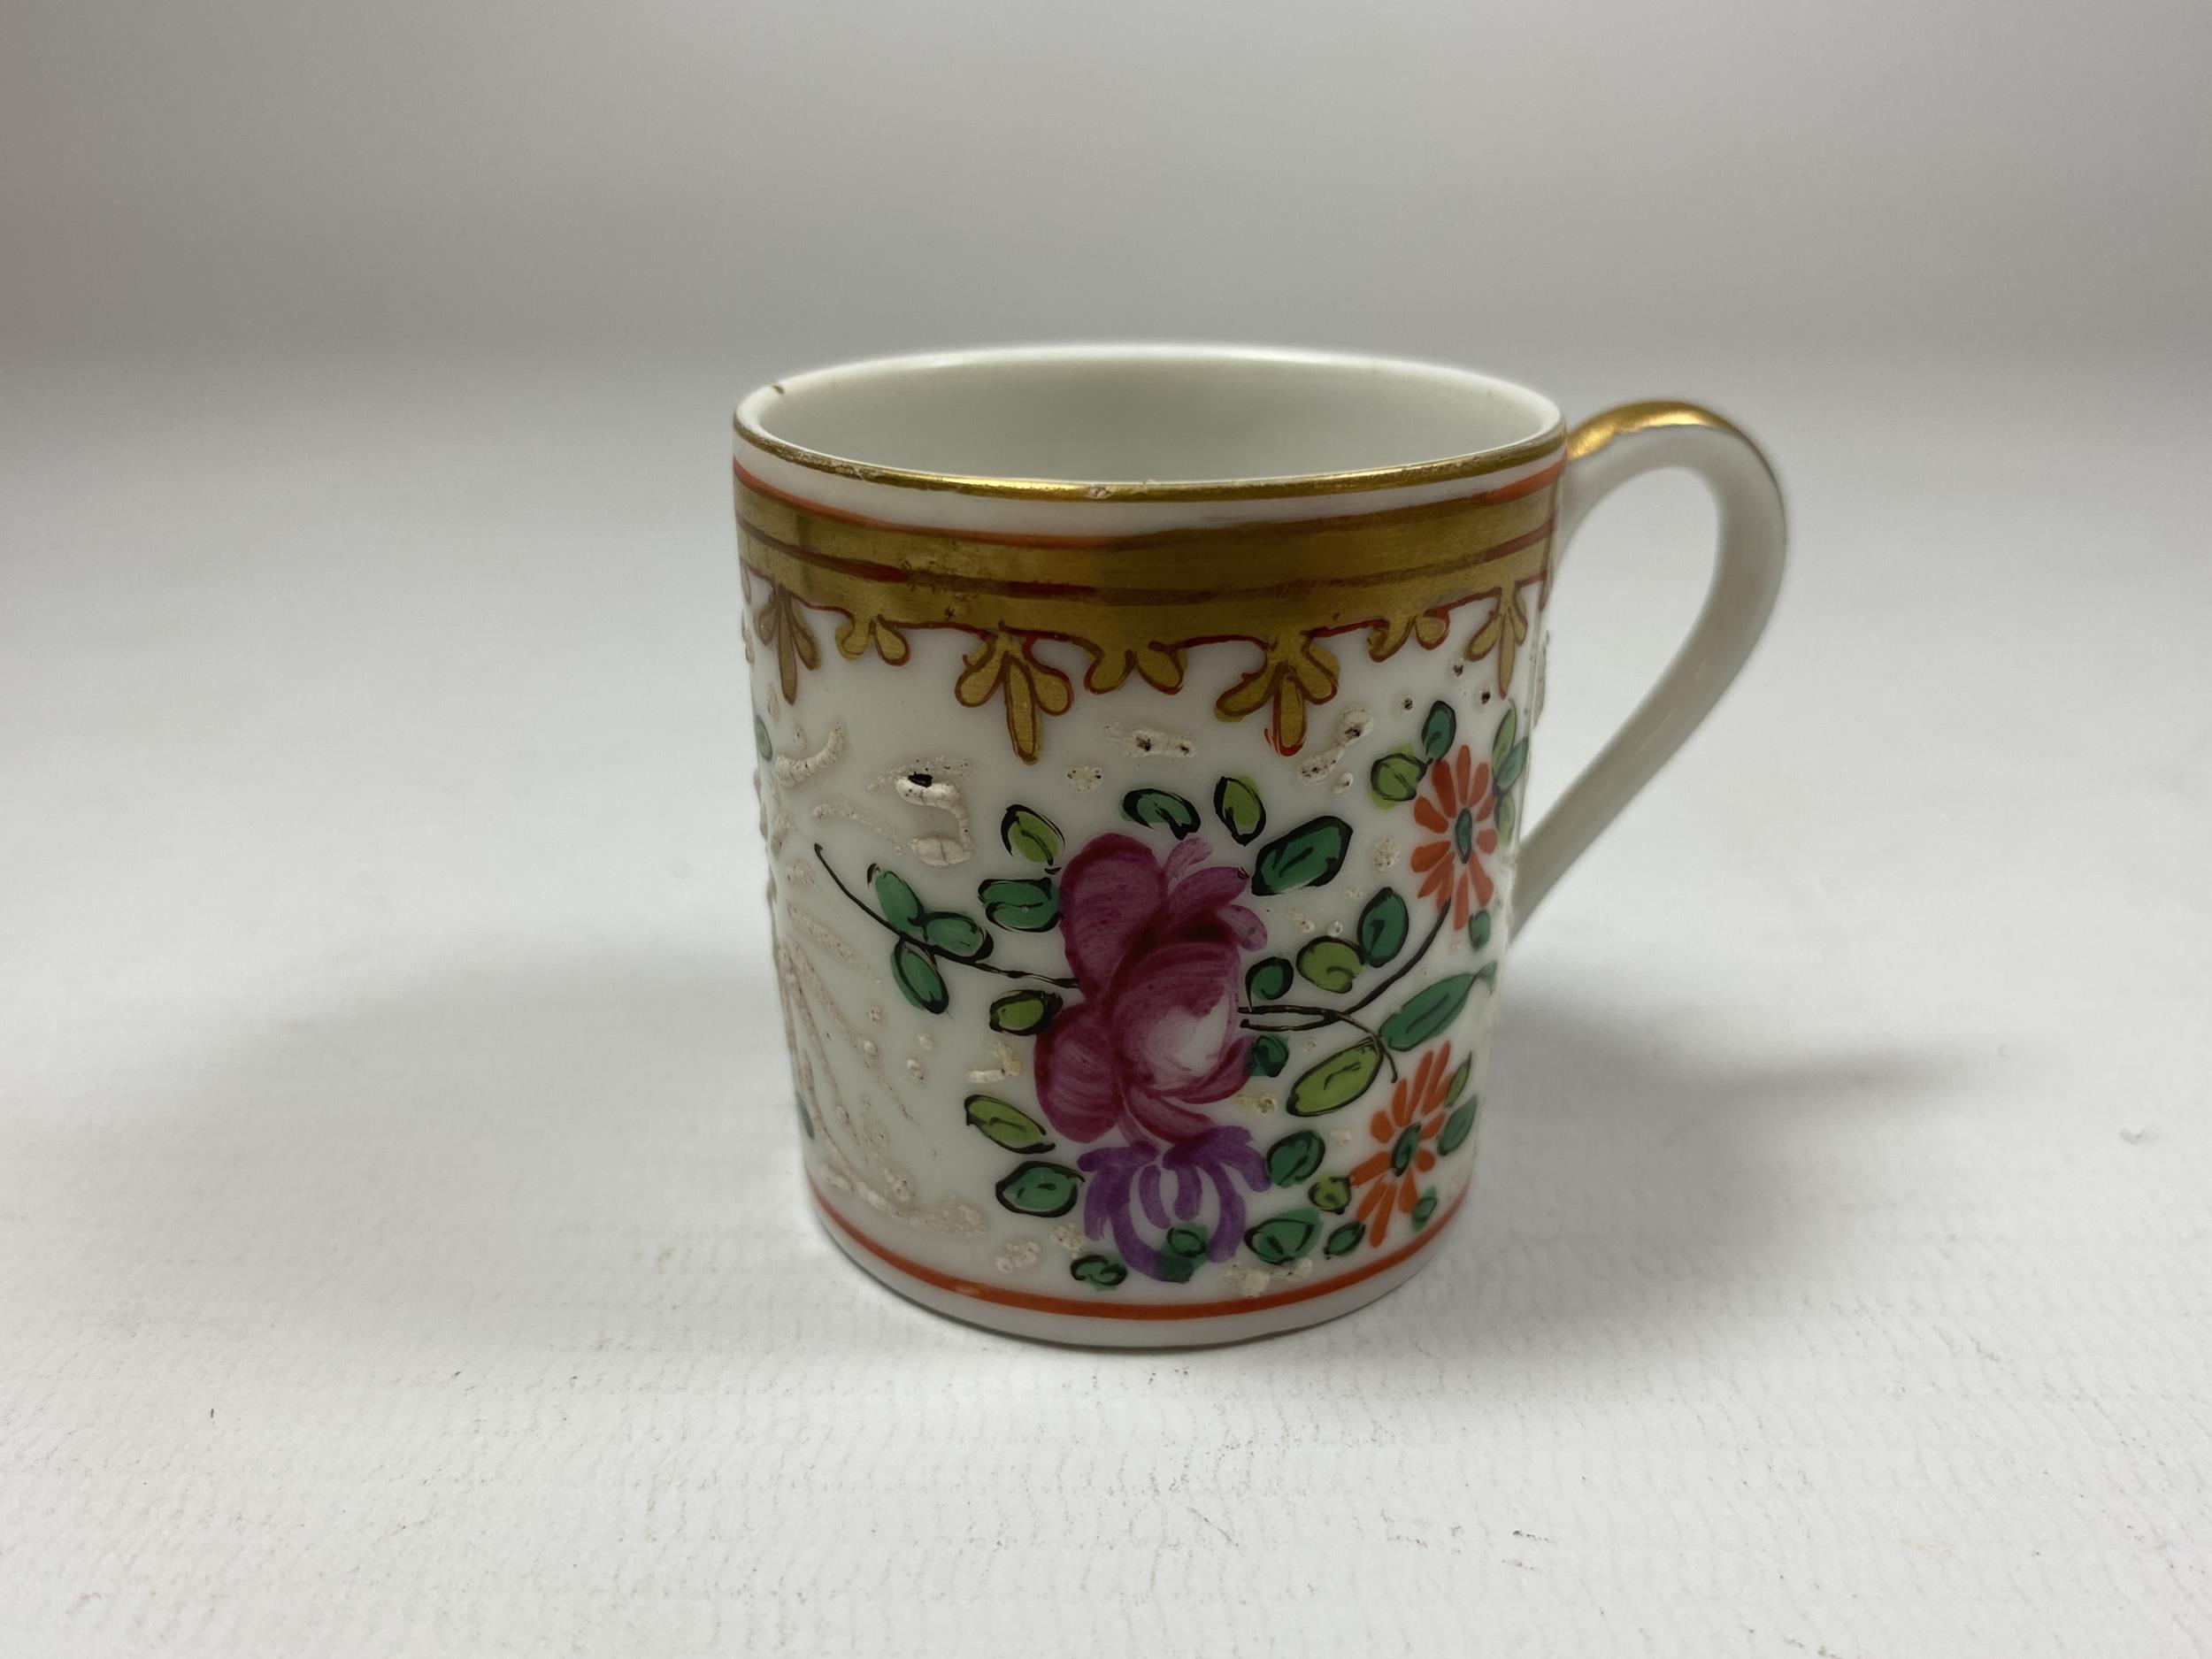 A MINIATURE 19TH CENTURY CHINESE EXPORT PORCELAIN TANKARD, HEIGHT 4CM - Image 2 of 4